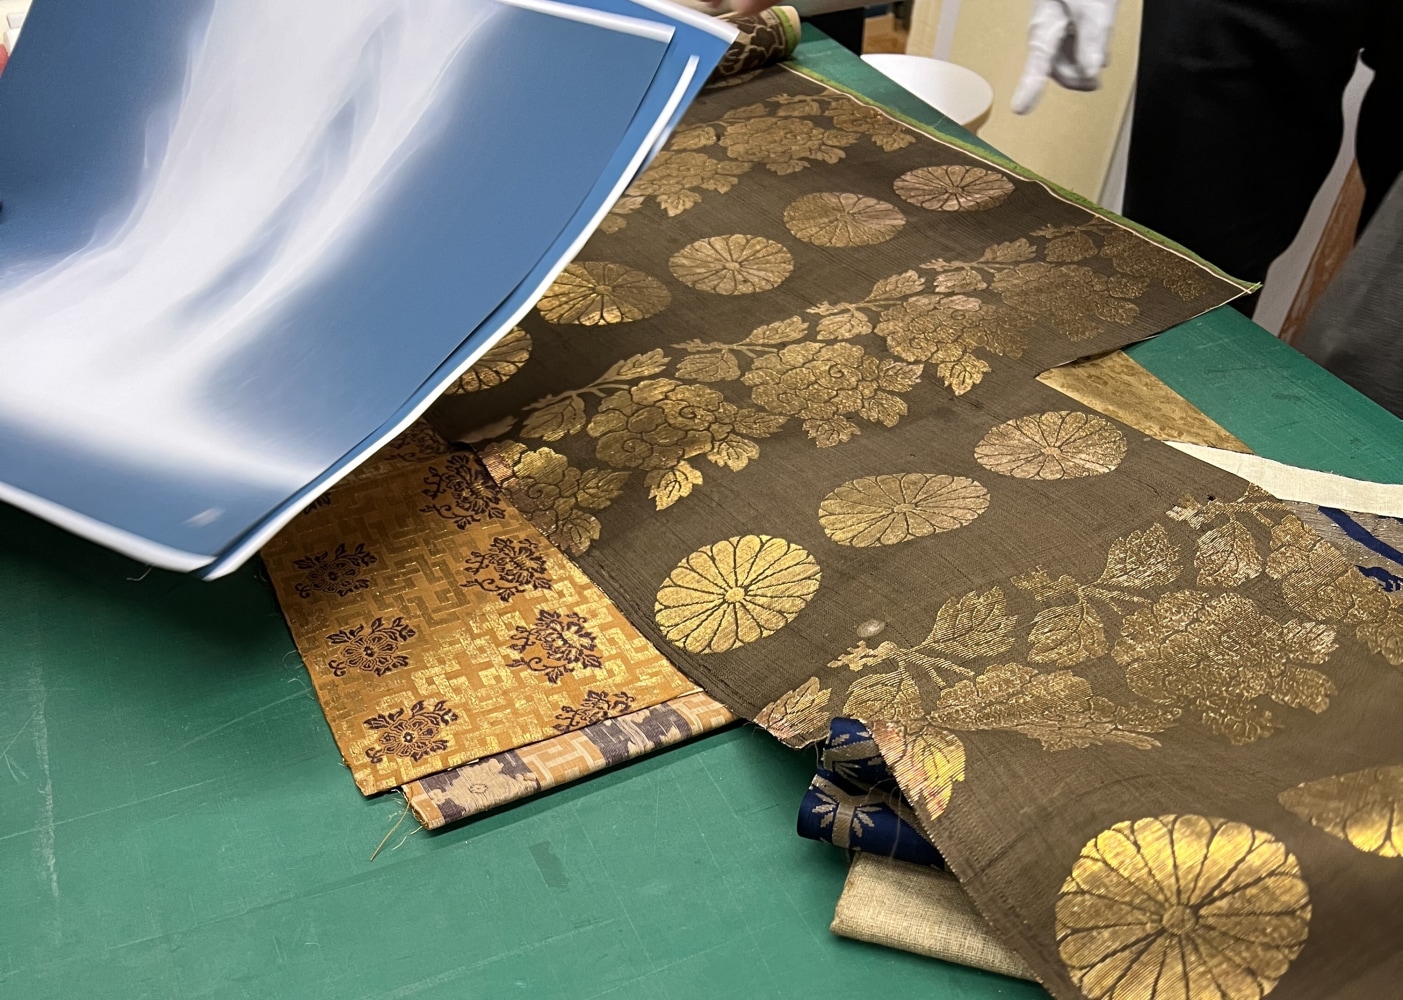 I am in Kyoto to select fabric for my new hanging scroll. &amp;nbsp;The Installer, Nakajima Seikodo holds some of the wondrful antique fabrics in their collection.